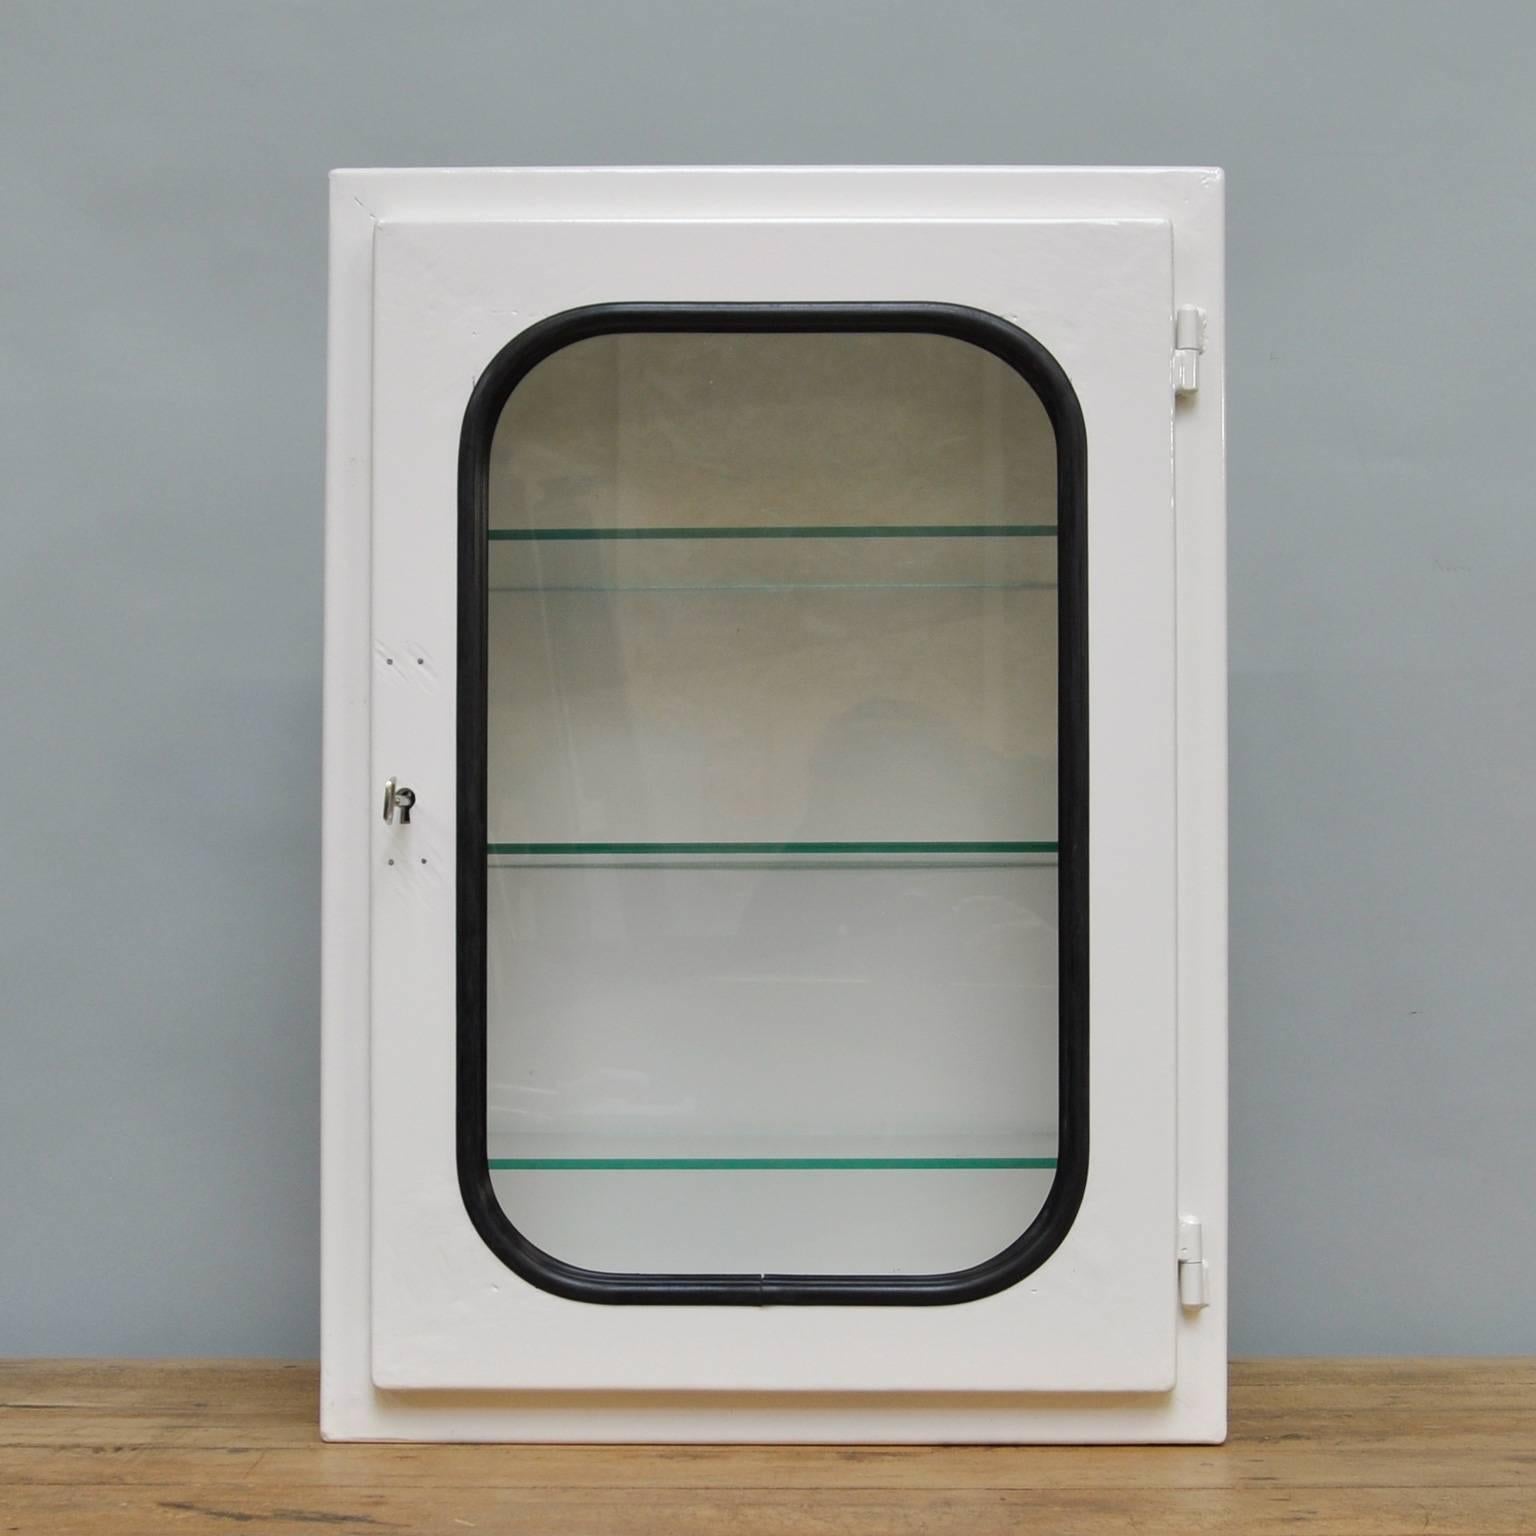 This medicine cabinet was designed in the 1970s and produced circa 1975 in Hungary. It is made of iron and glass, which is held by a black rubber strip. The cabinet comes with three adjustable glass shelves. The cabinet is restored (powder-coated).